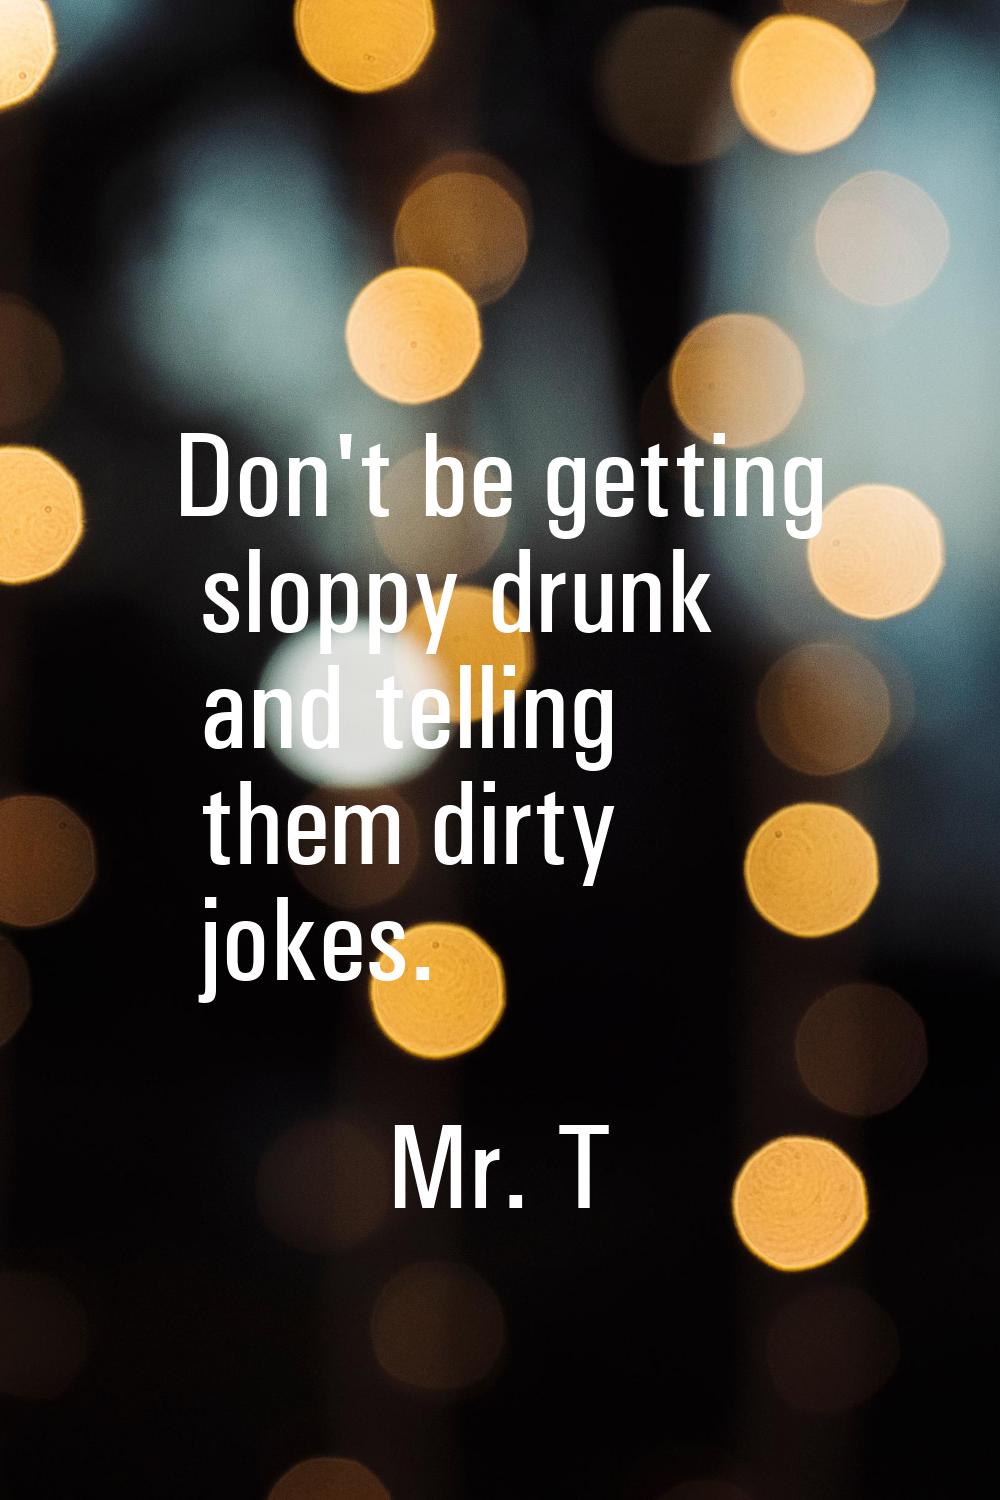 Don't be getting sloppy drunk and telling them dirty jokes.